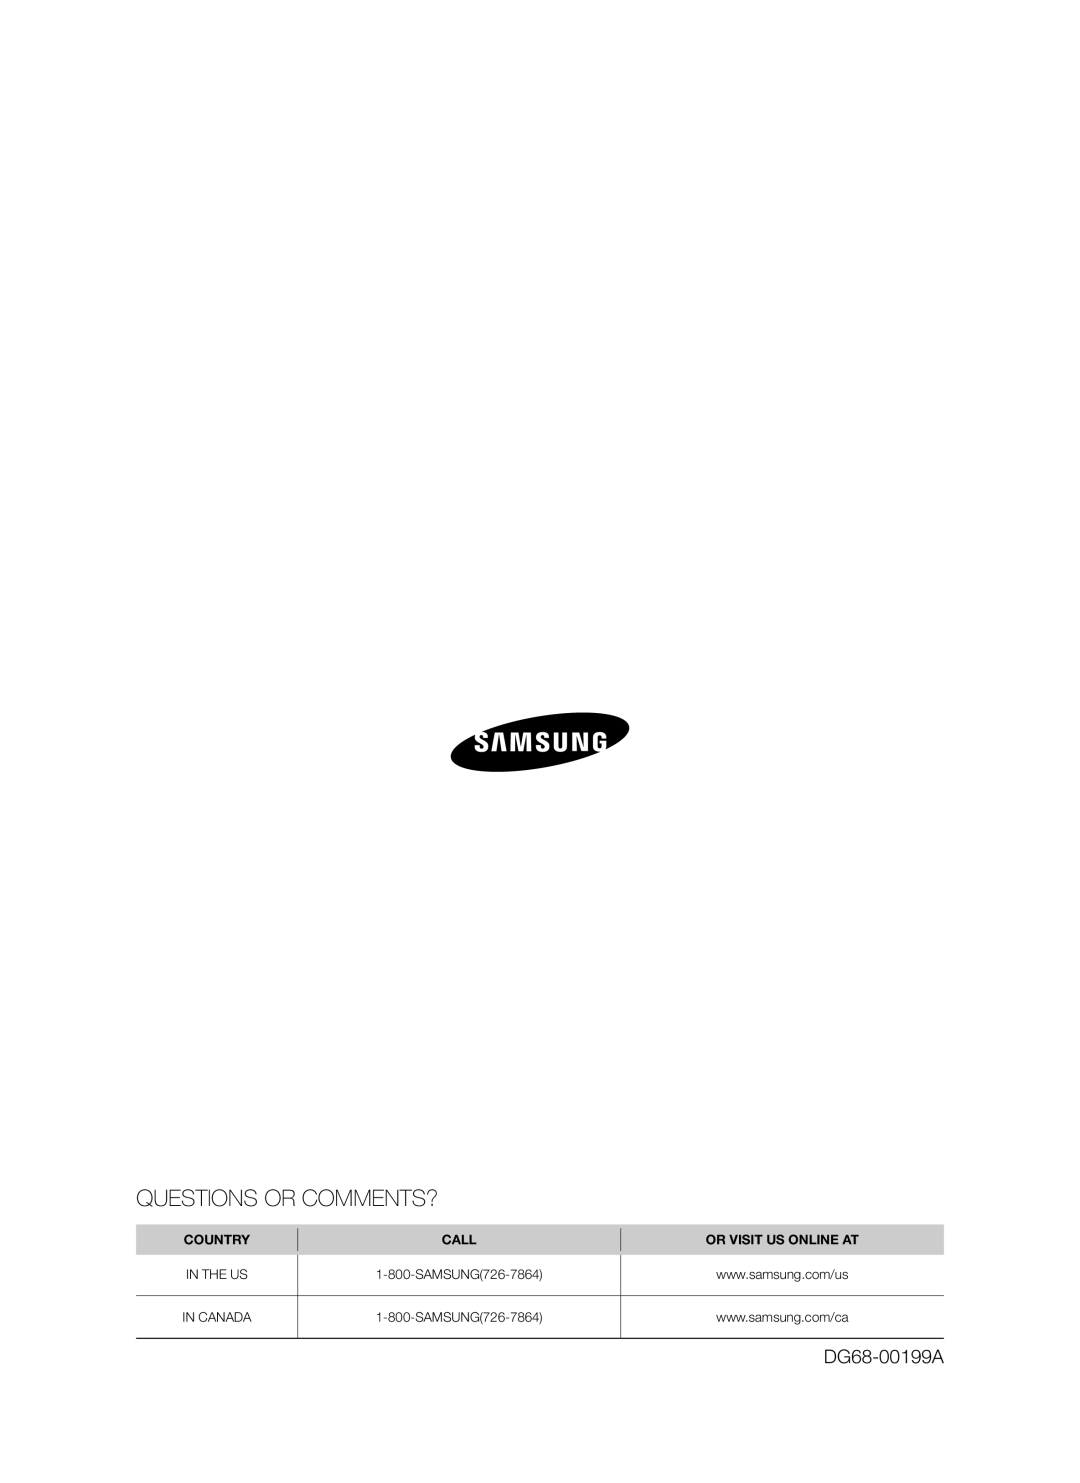 Samsung FTQ353 Questions Or Comments?, DG68-00199A, Country, Call, Or Visit Us Online At, In The Us, SAMSUNG726-7864 